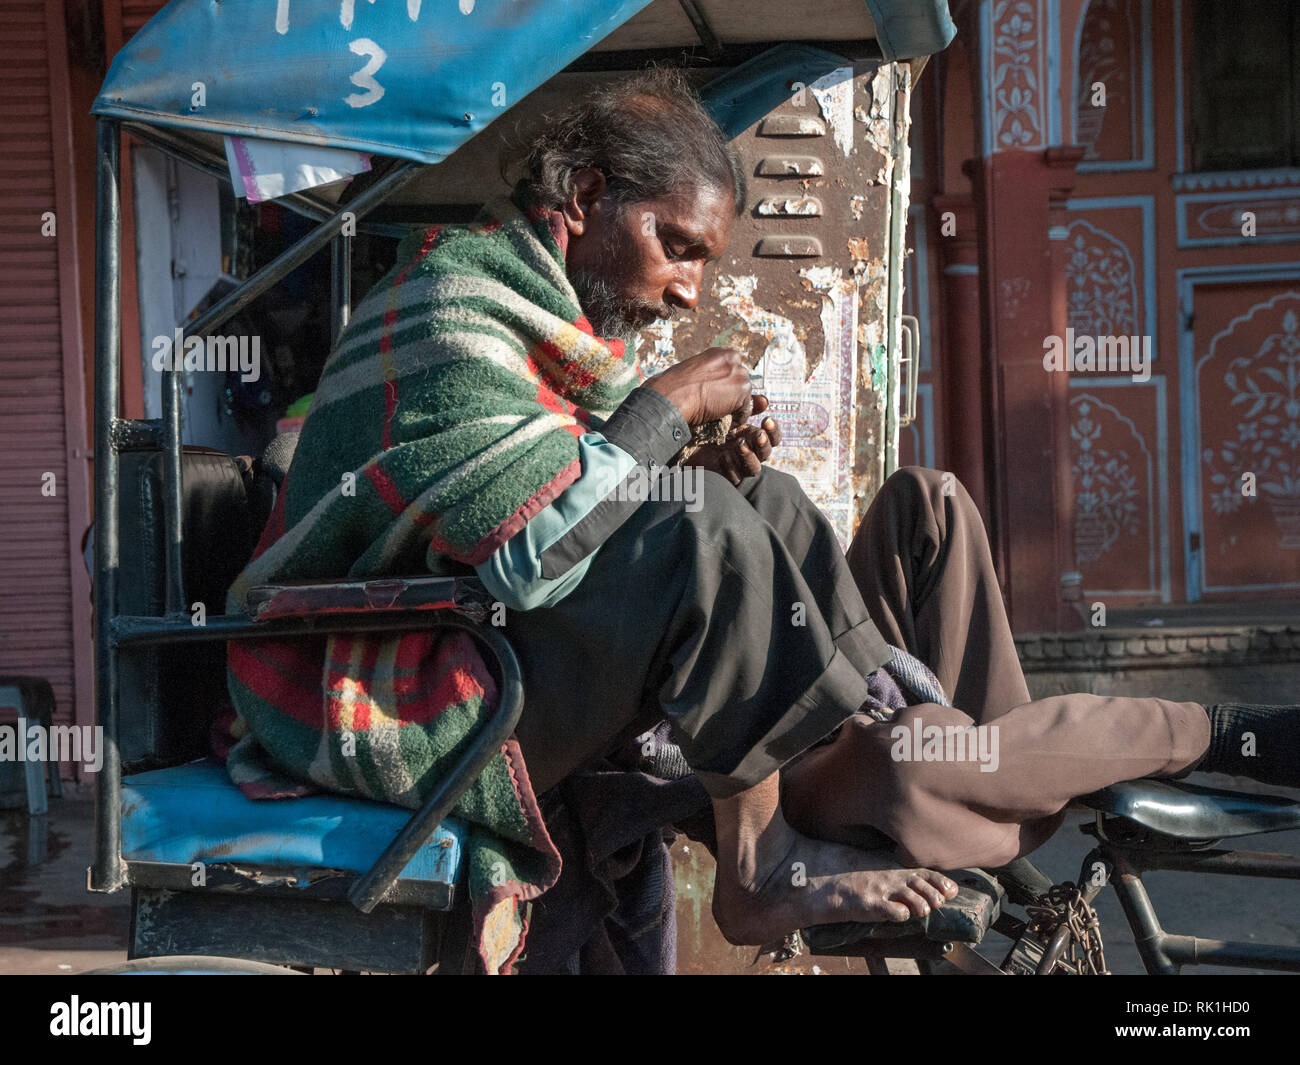 Rickshaw driver waiting for customers in Jaipur in Rajasthan, India. Jaipur is the largest city in Rajasthan with a population of 3-4 million. Stock Photo